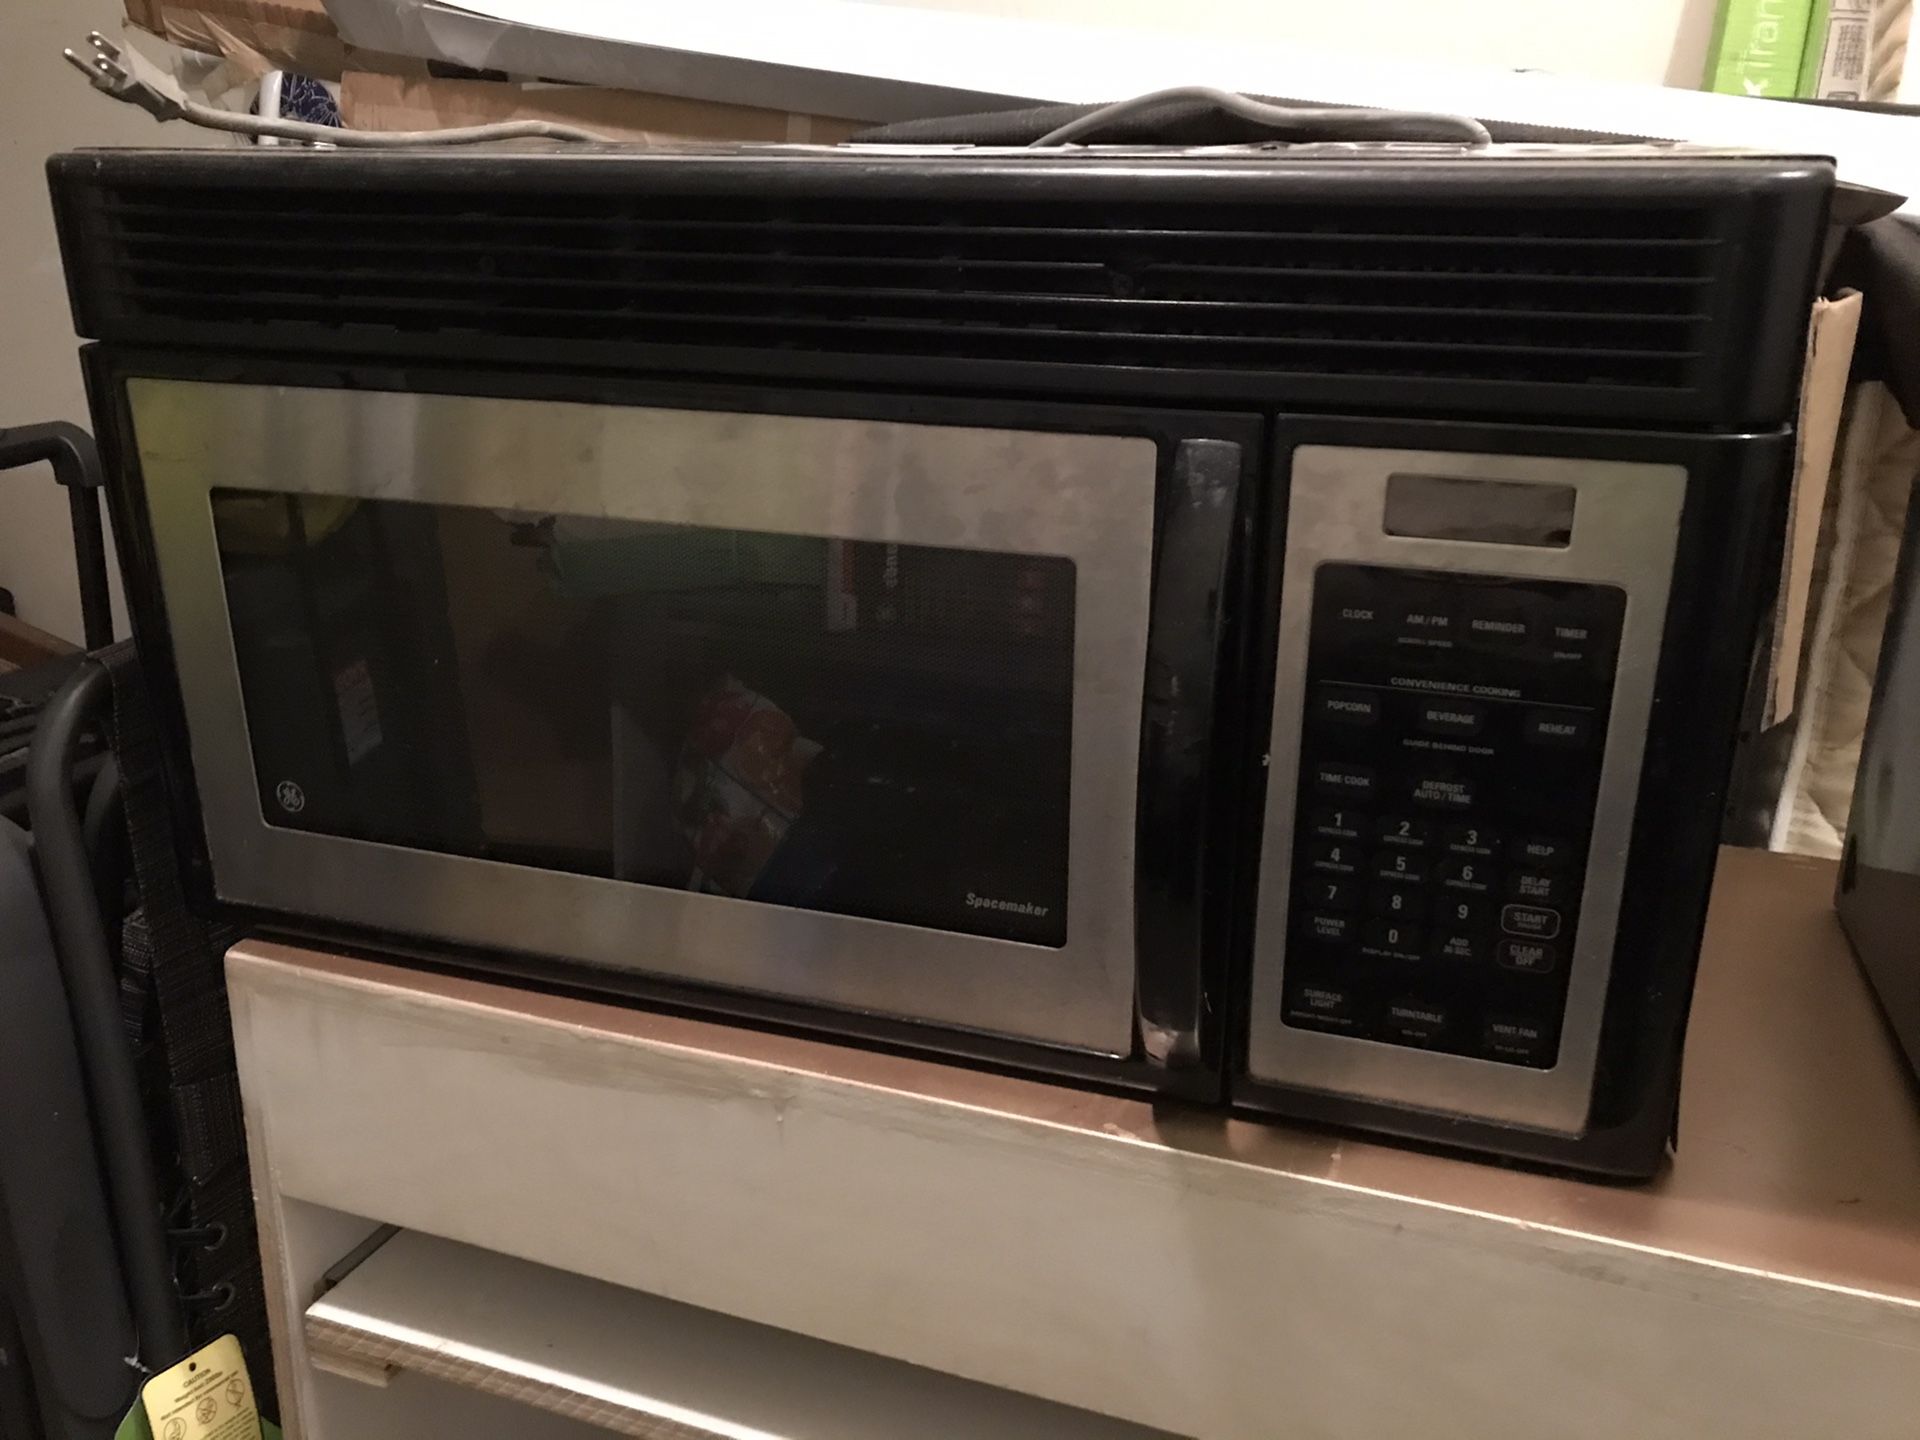 Free microwave in Mendon